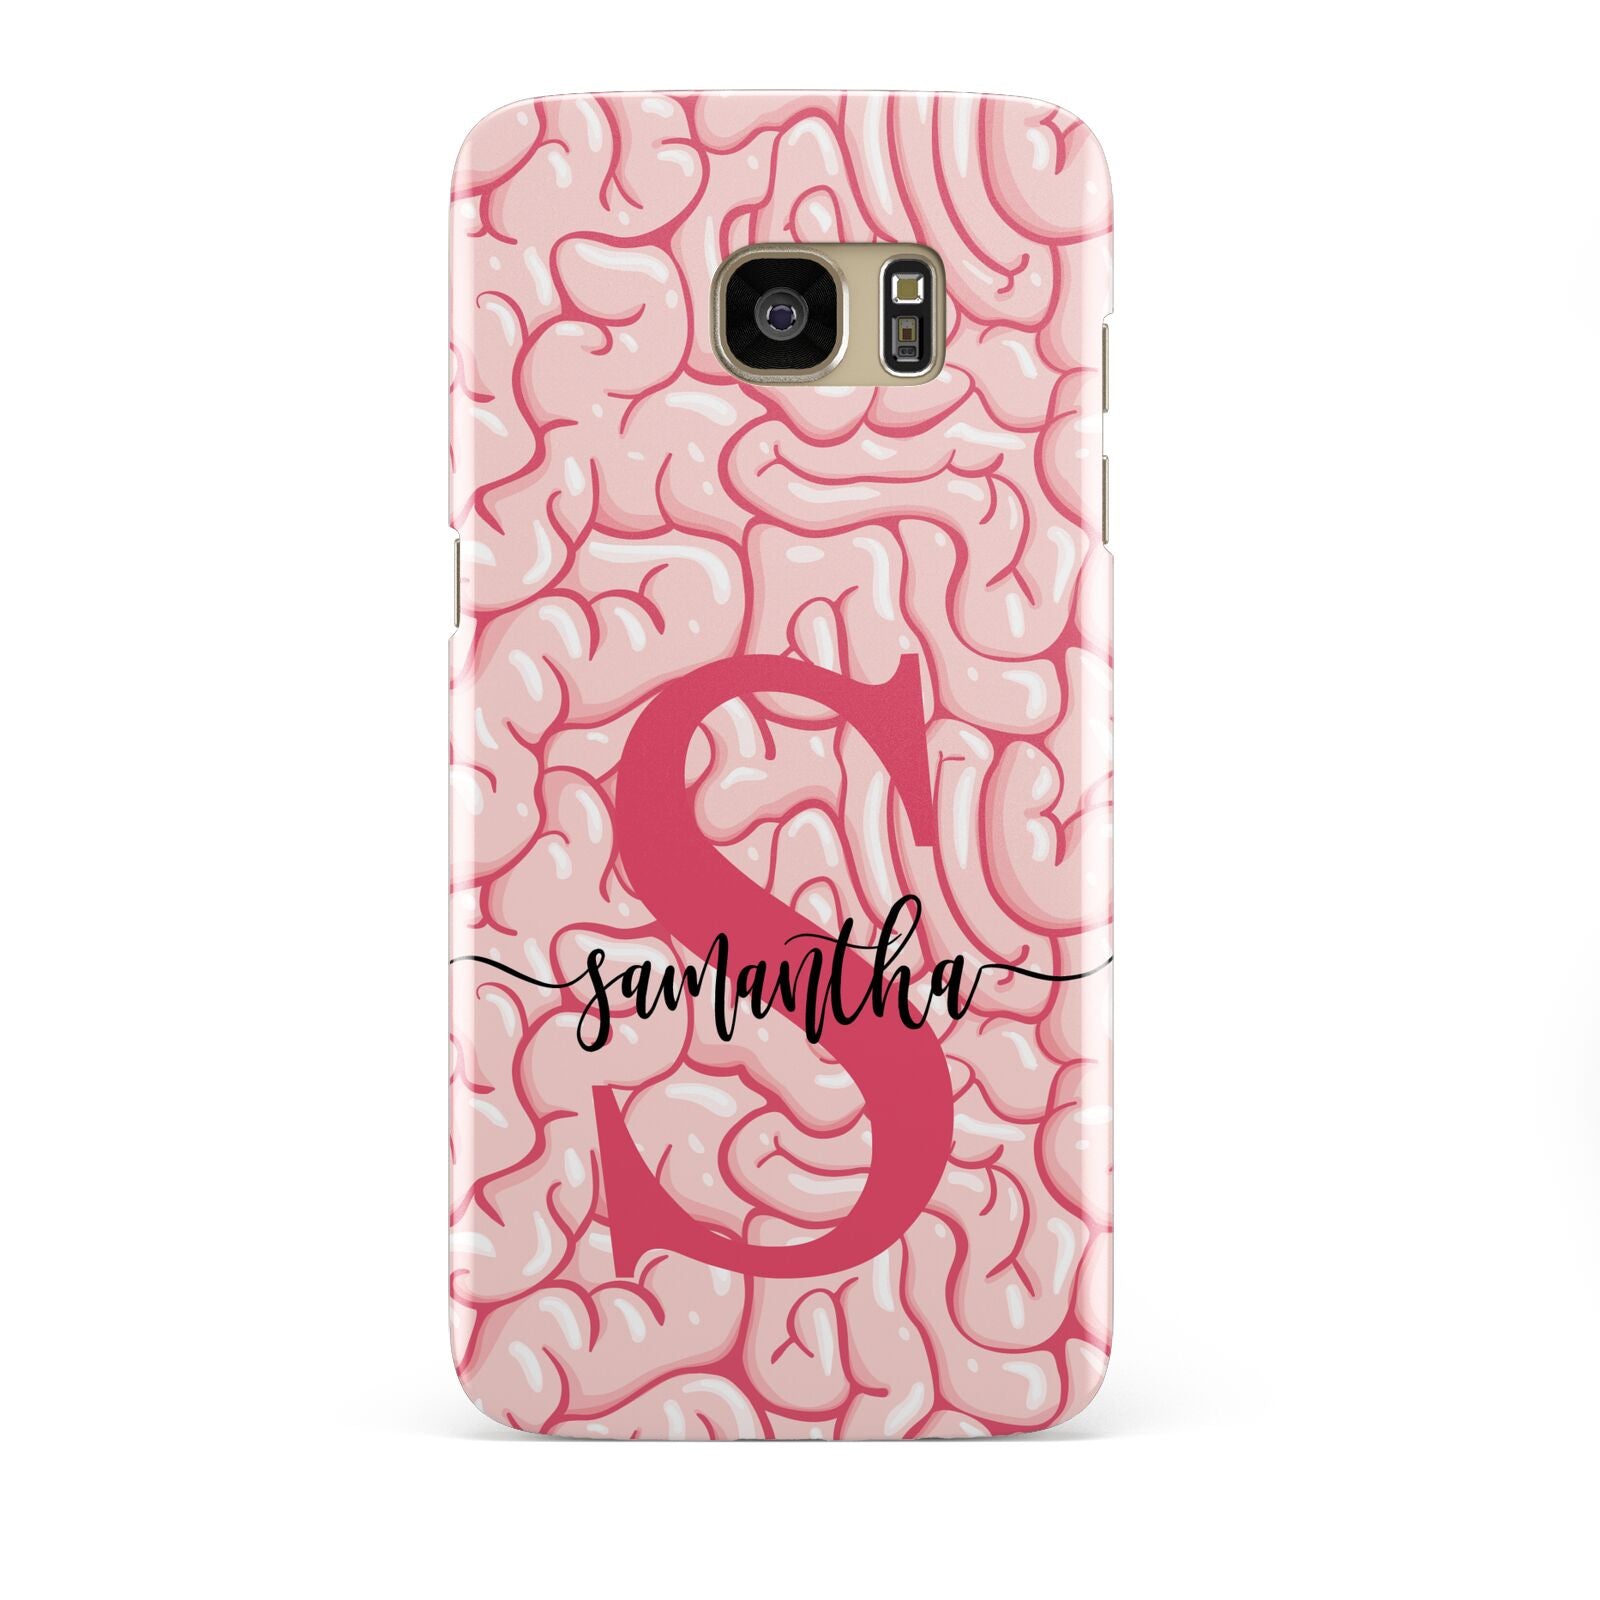 Brain Background with Monogram and Text Samsung Galaxy S7 Edge Case